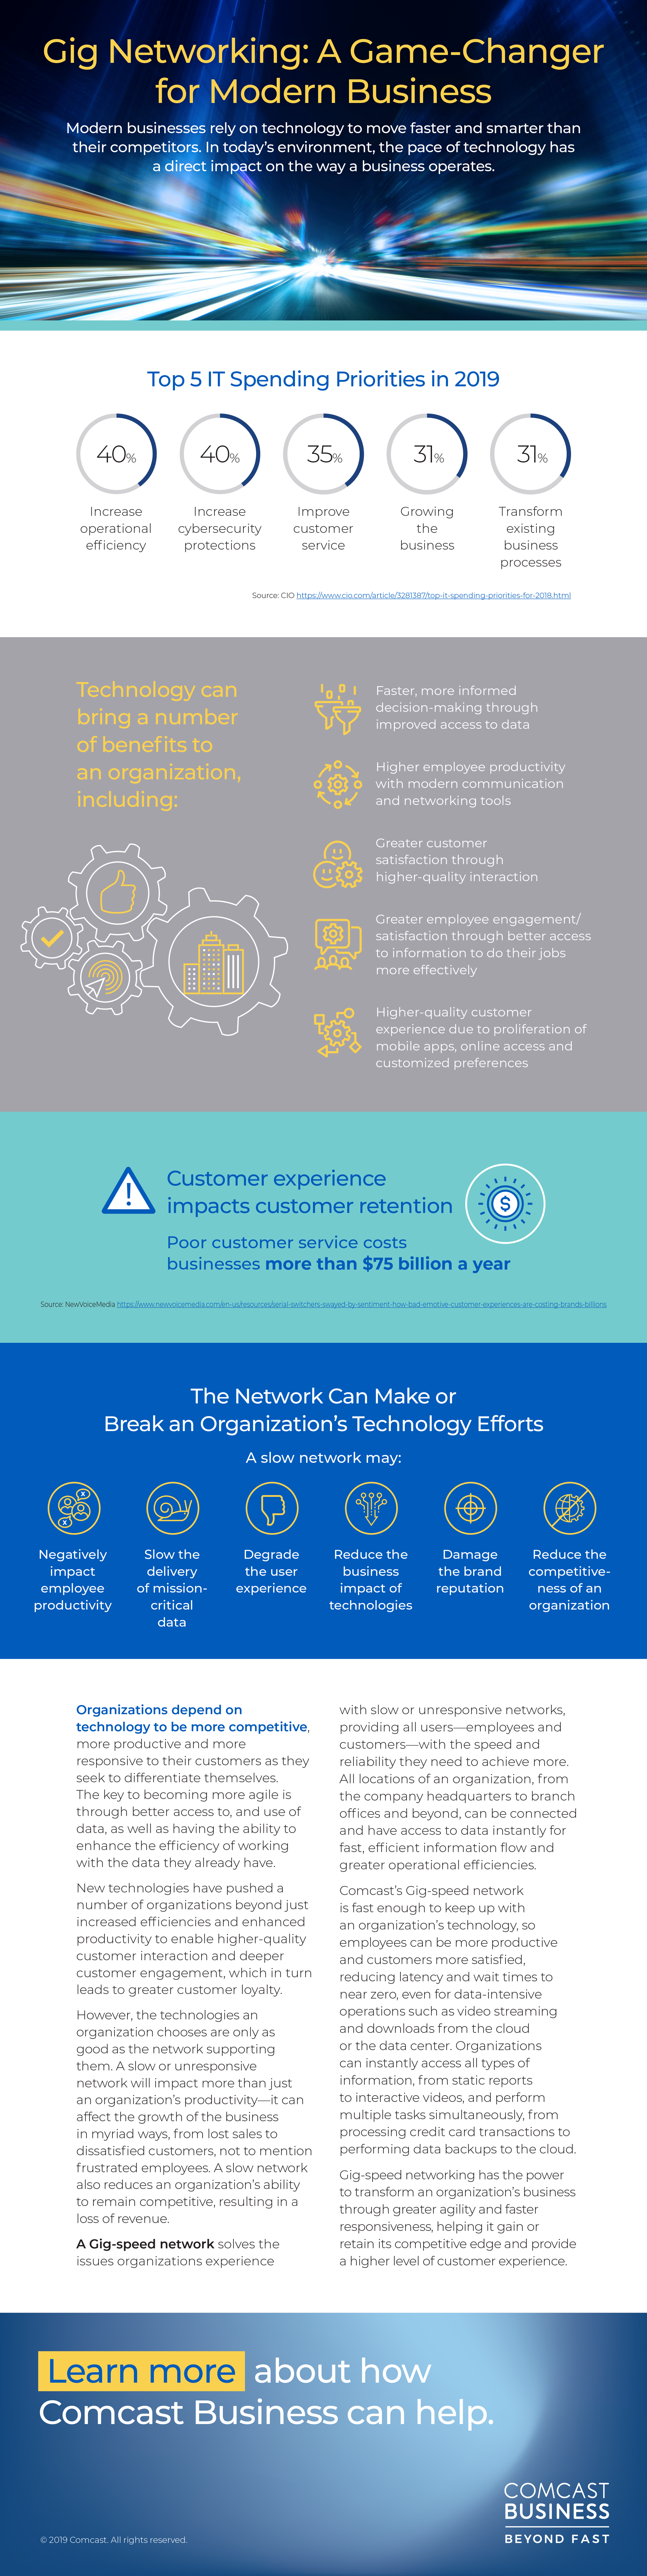 Gig networking infographic